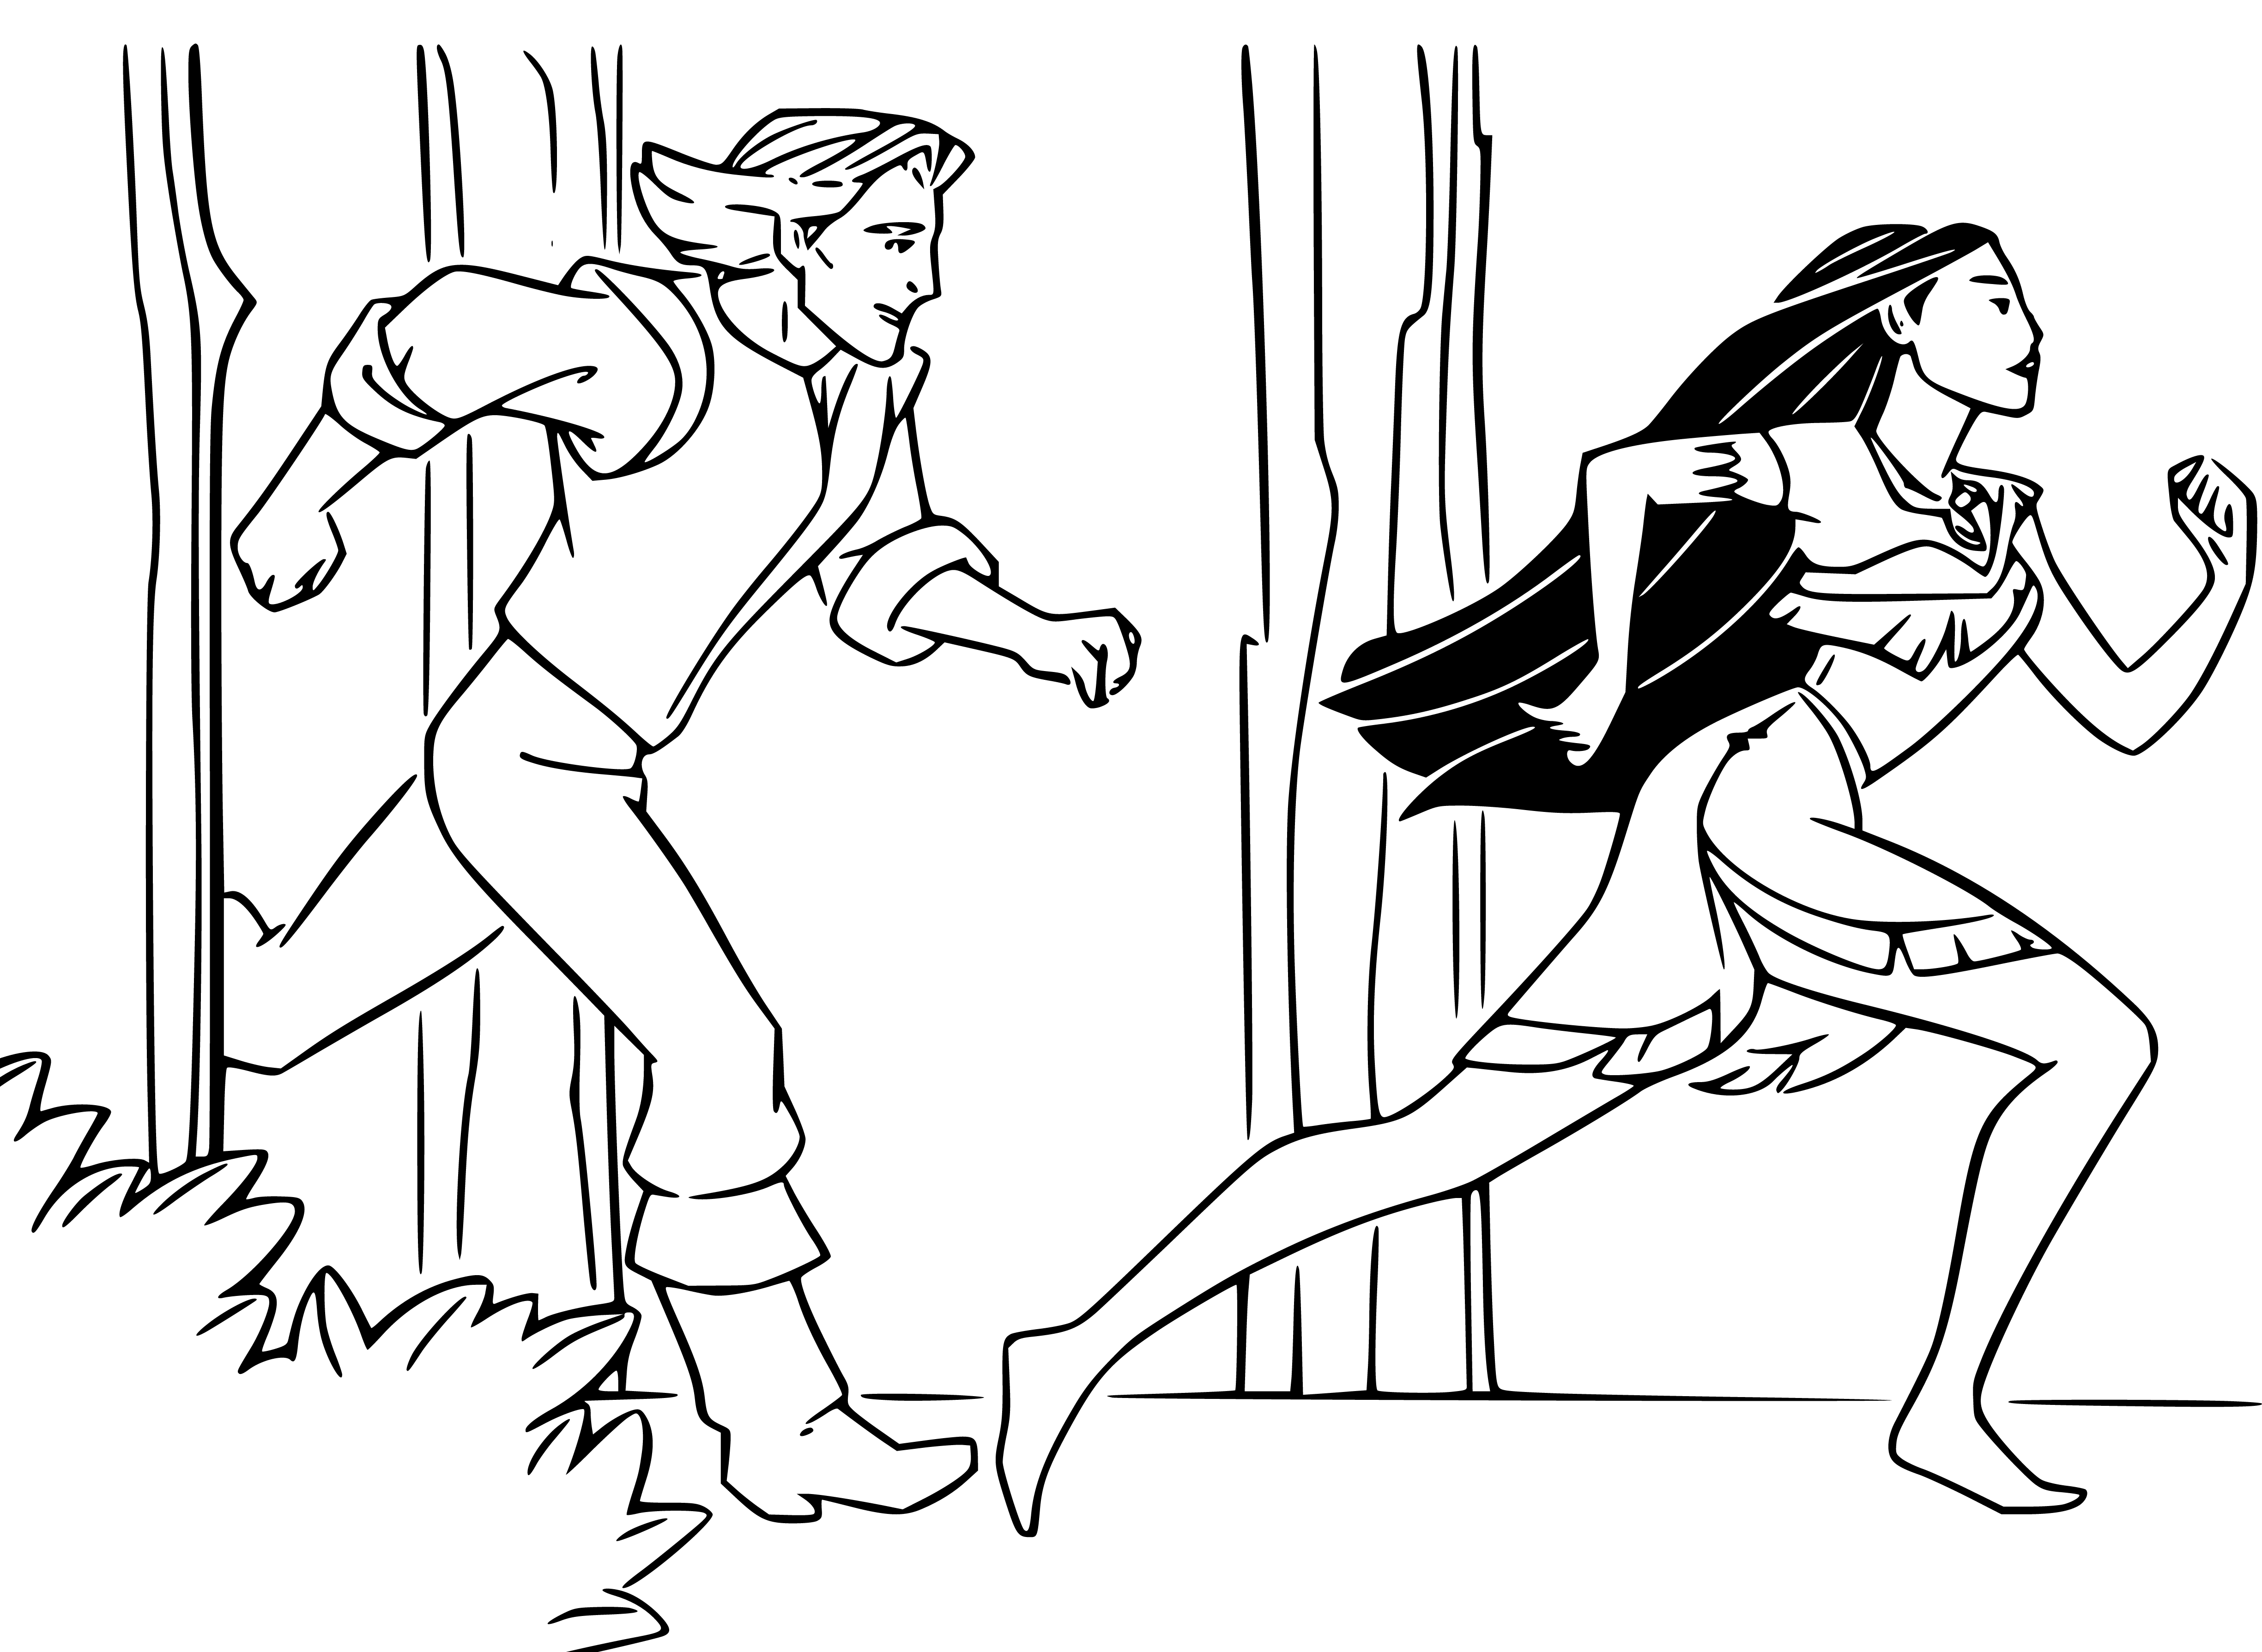 Printable Pocahontas and John running Coloring Page for kids.